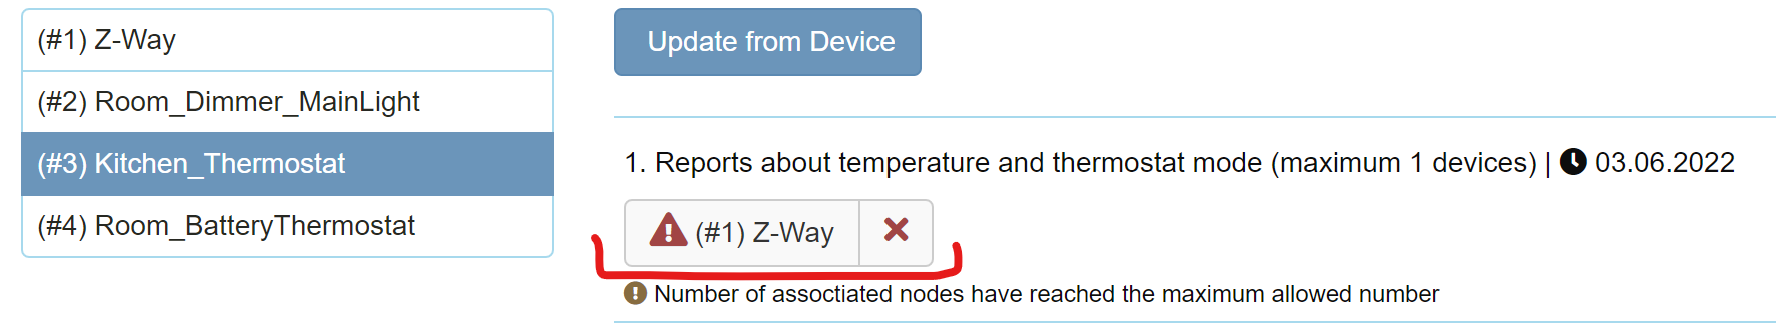 assoc_with_thermostat.png